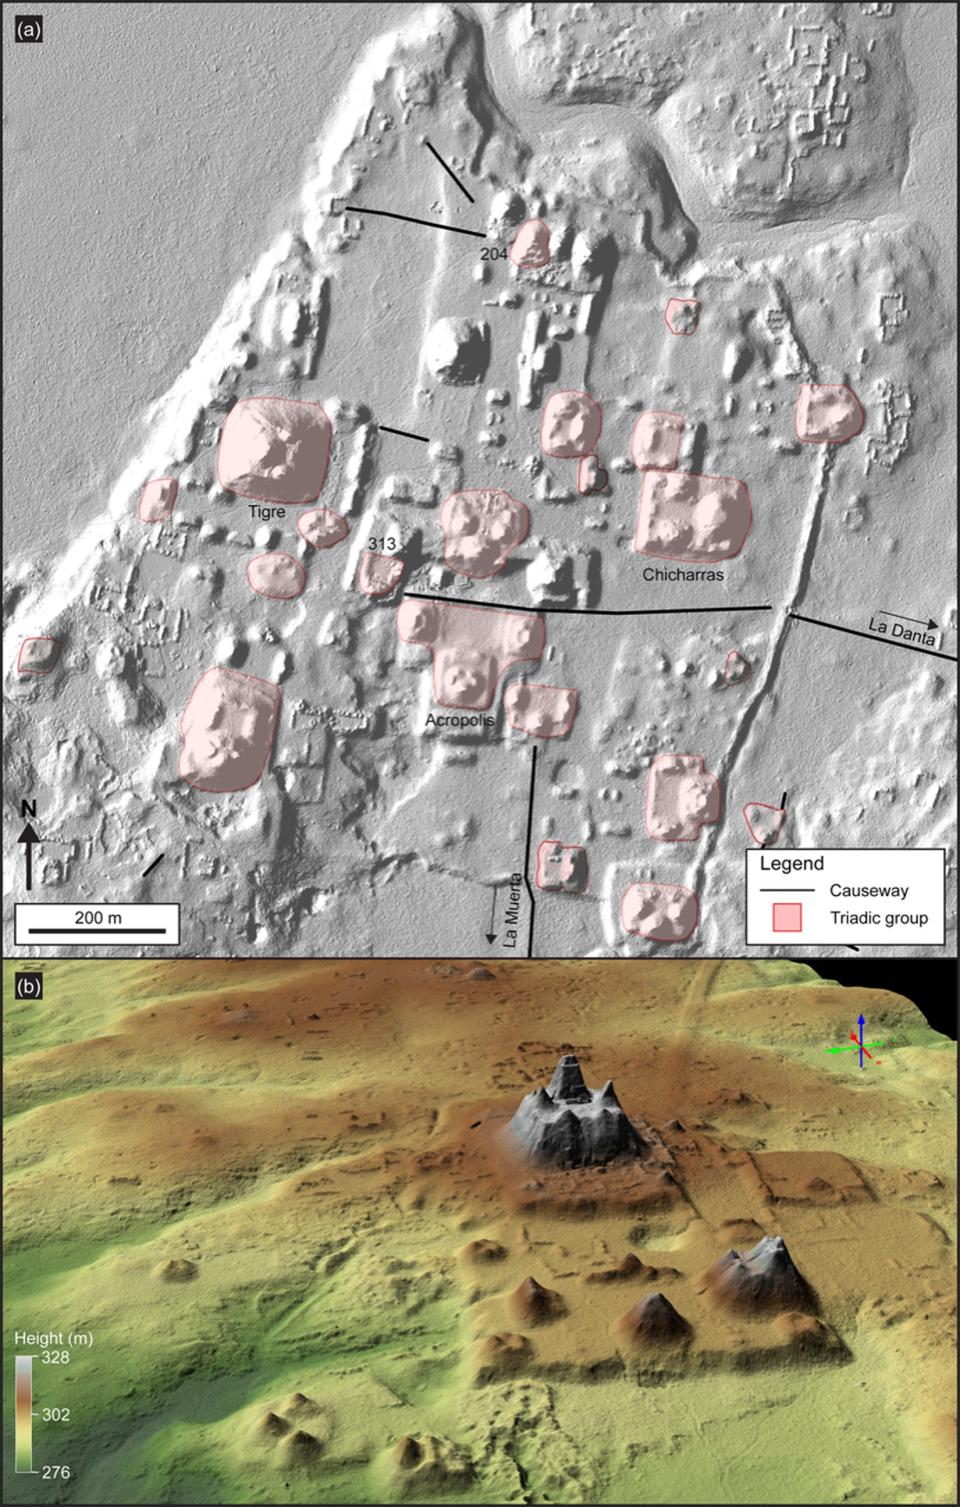 Example of structures found with LiDAR.